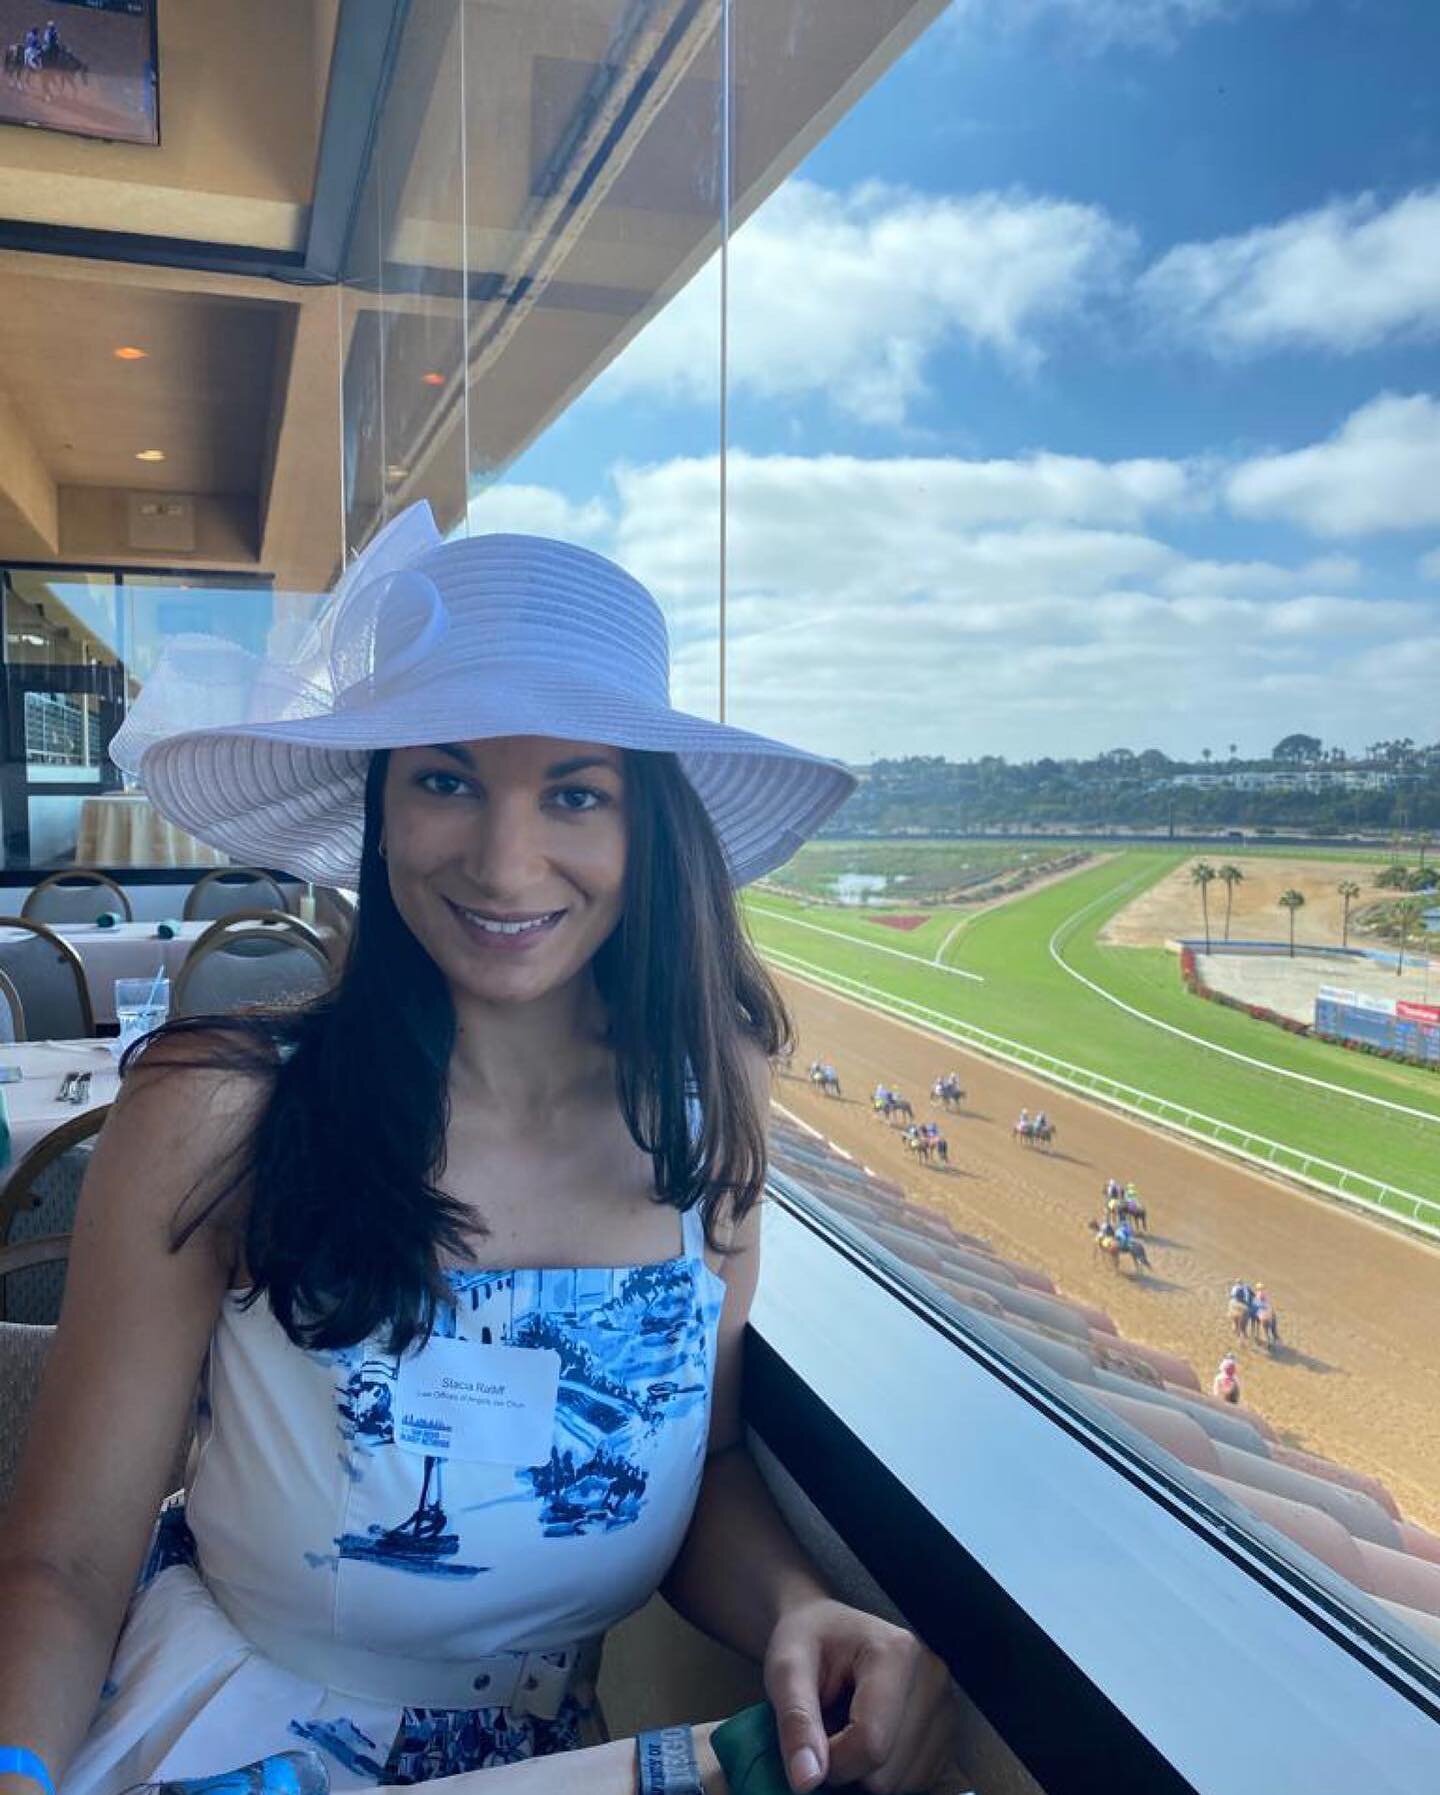 Our Associate Attorney, Stacia, representing our firm at San Diego Injury Network&rsquo;s networking event at the Del Mar Racetrack! Looking fabulous!! 💖👒 

&mdash;&mdash;&mdash;
#SDInjuryNetwork #SanDiegoInjuryNetwork #DelMarRacetrack #DelMarFairg